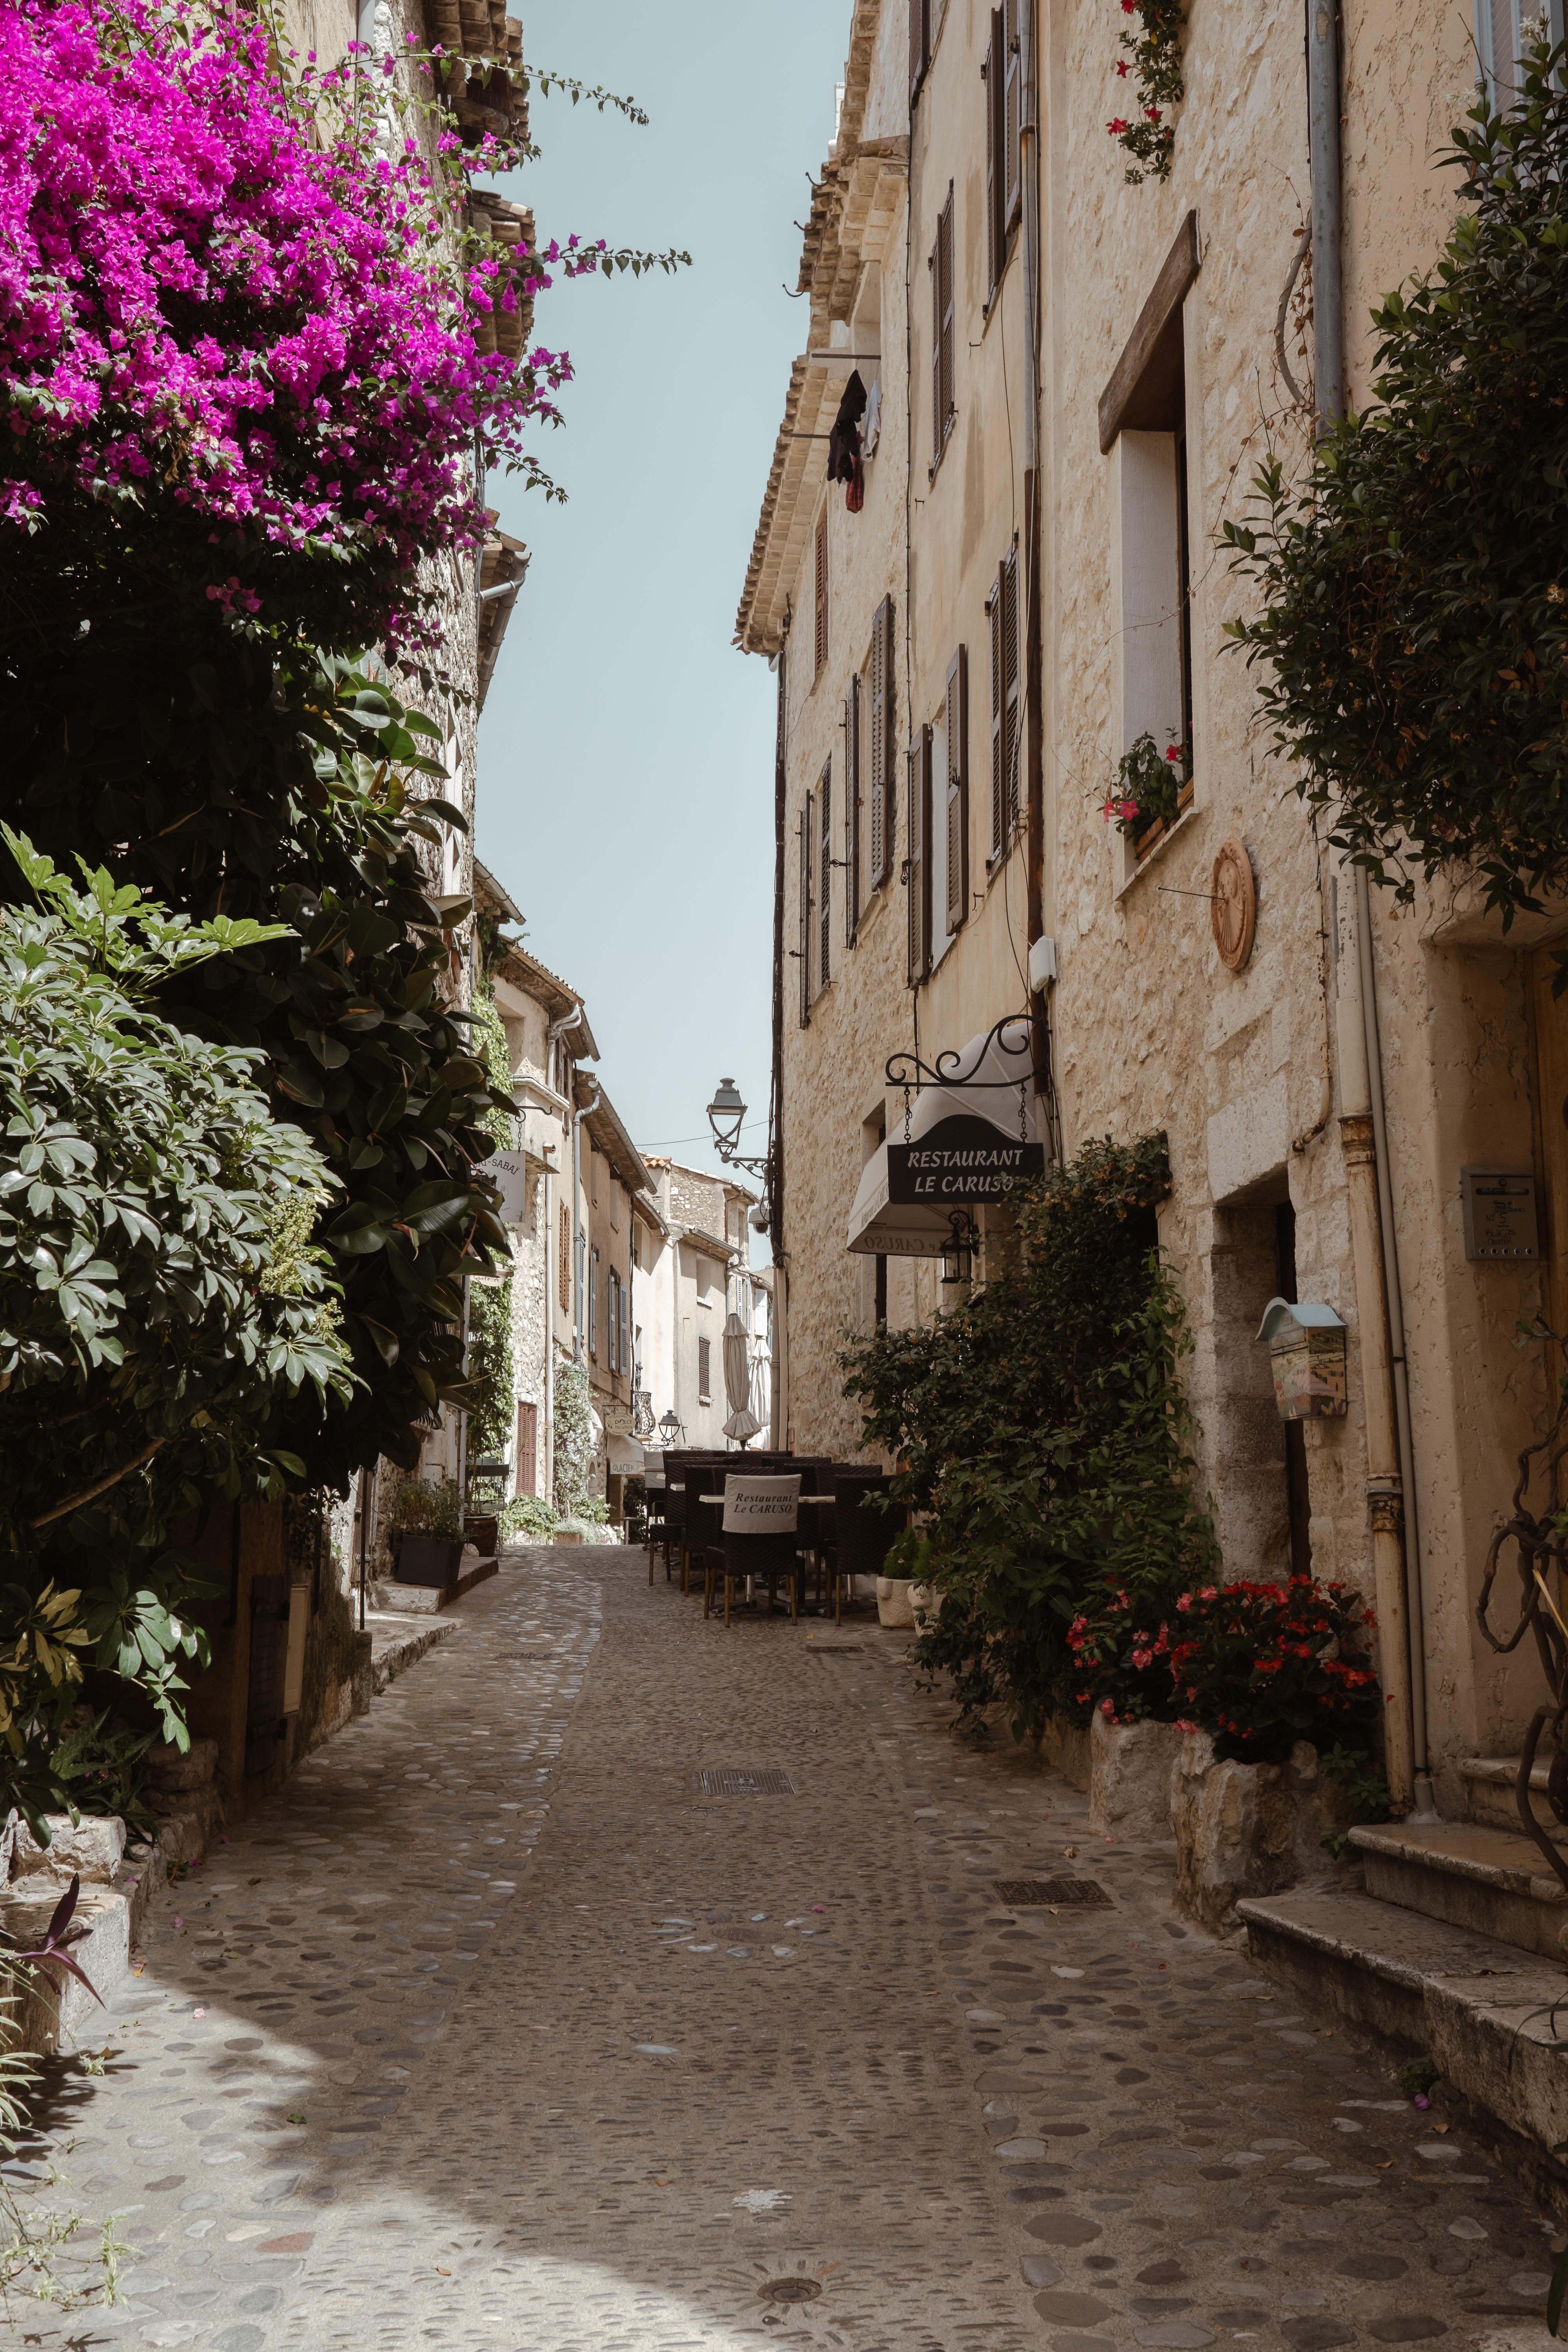 Saint-Paul-de-Vence - Another must-do on our list of the prettiest towns to visit in the South of France Eze /Photo Credit Sonia Mota